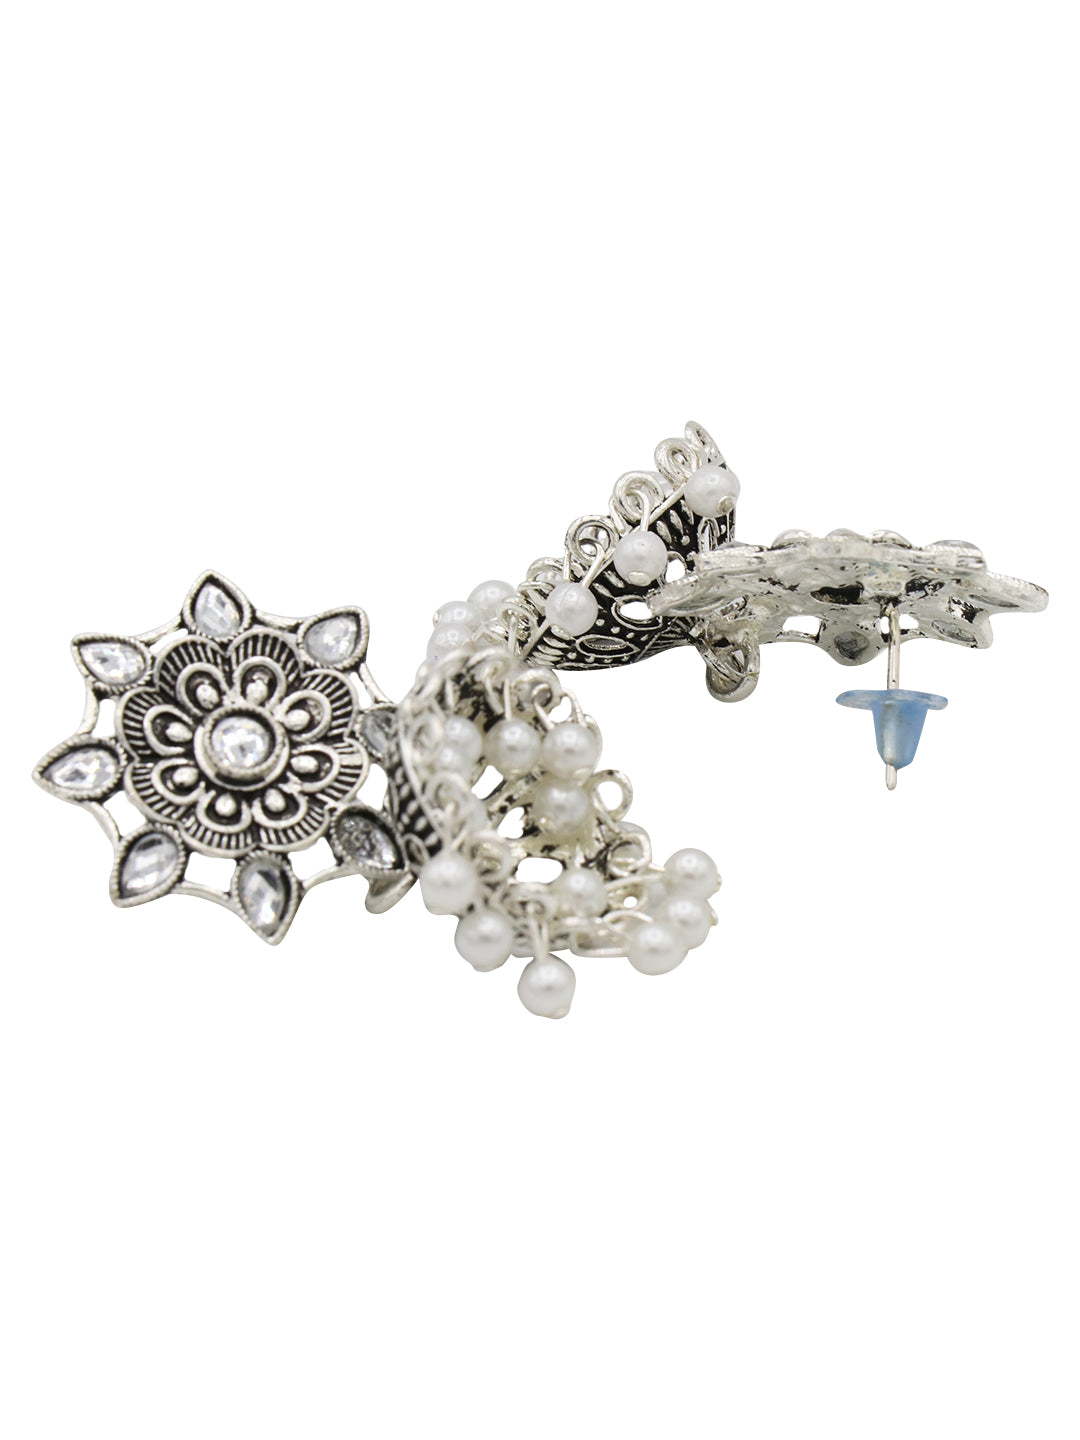 Silver-Plated White Stone Studded Flower Shaped Jhumkas Earrings